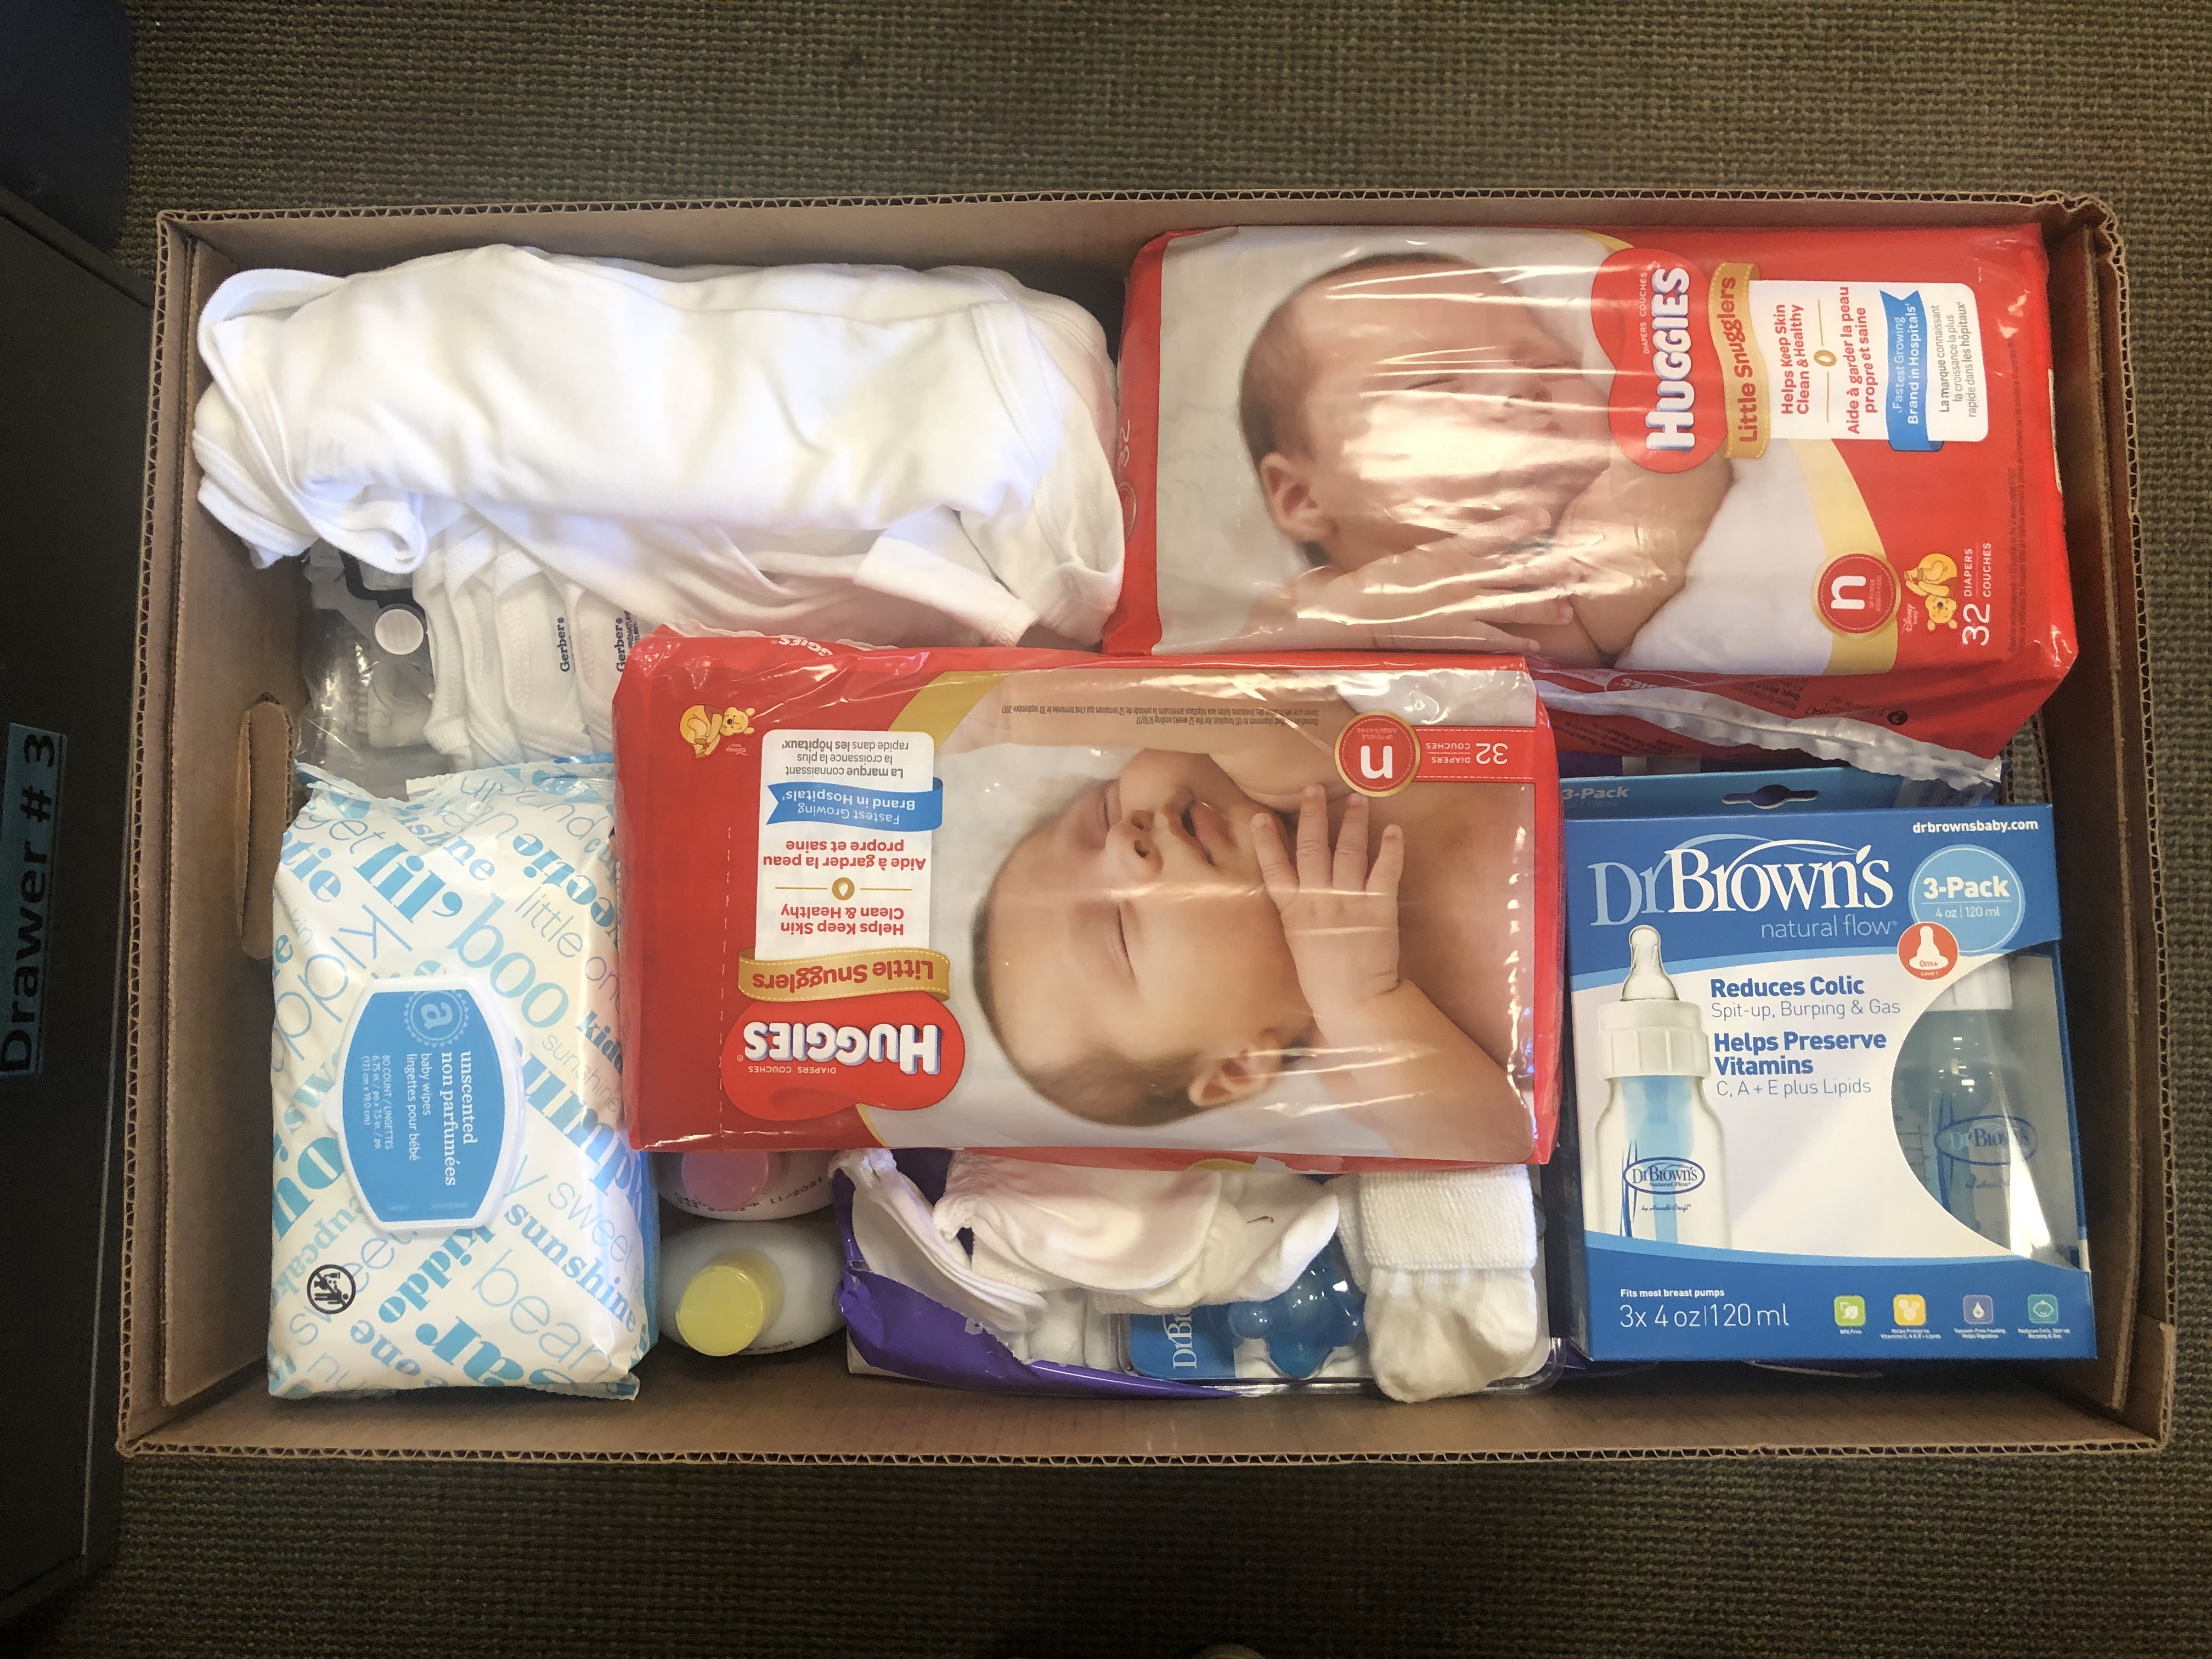 The Welcome Baby care package includes diapers, wipes, bottles, and other things newborn's need for the first four weeks of life.   COURTESY CMEE